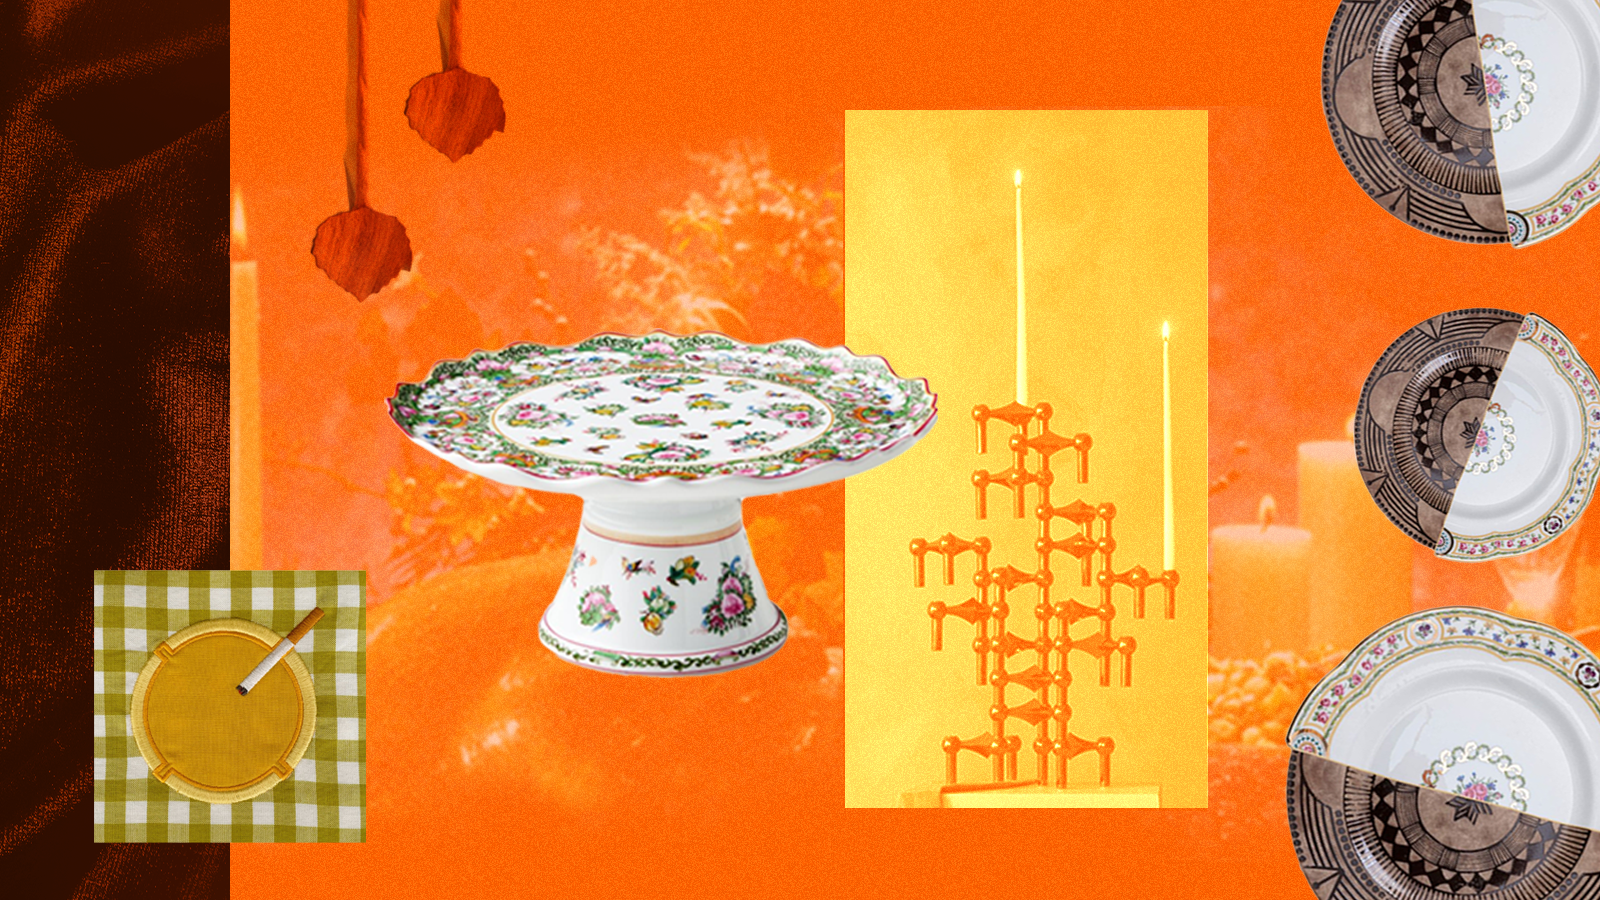 A collage featuring a fabric cocktail napkin depicting an ashtray, a cake stand, leaf-shaped salad servers, an artistic rendering of a candle centerpiece, and plates 